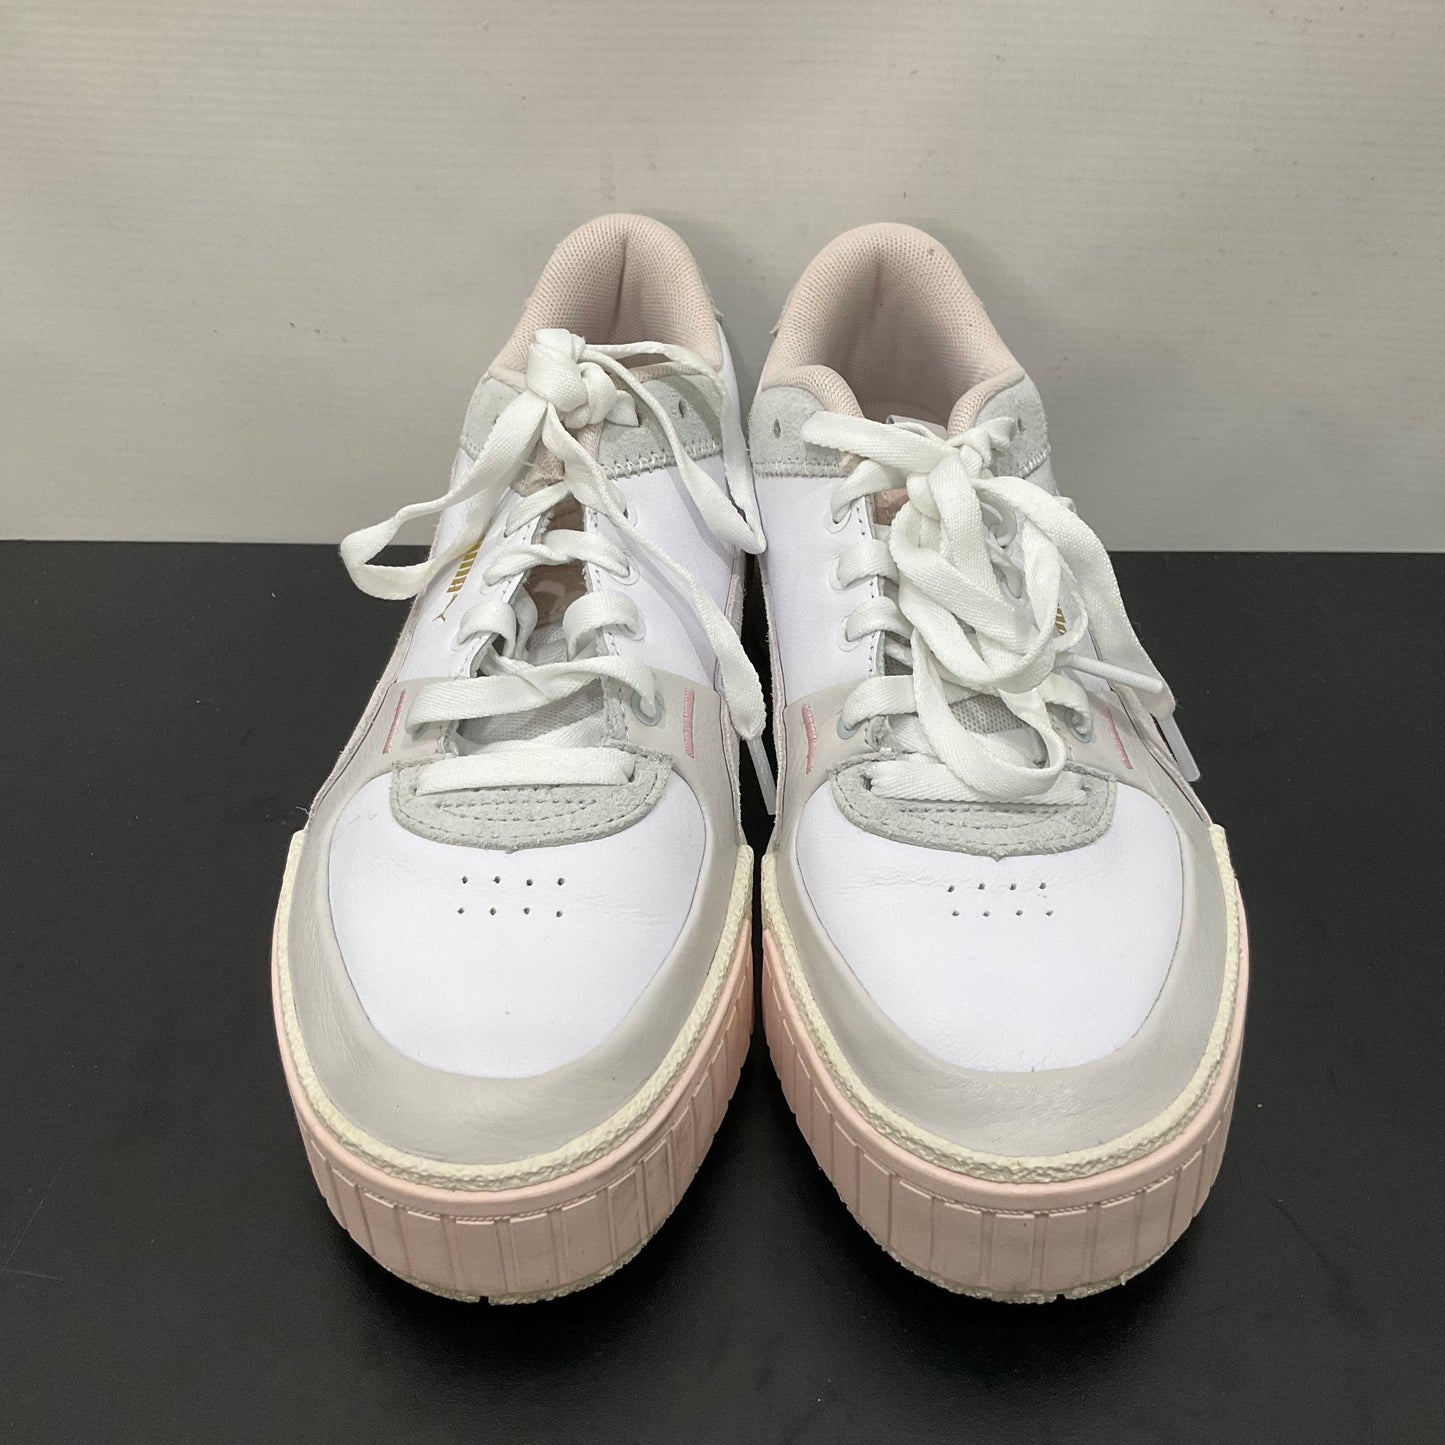 White Shoes Sneakers Puma, Size 8.5